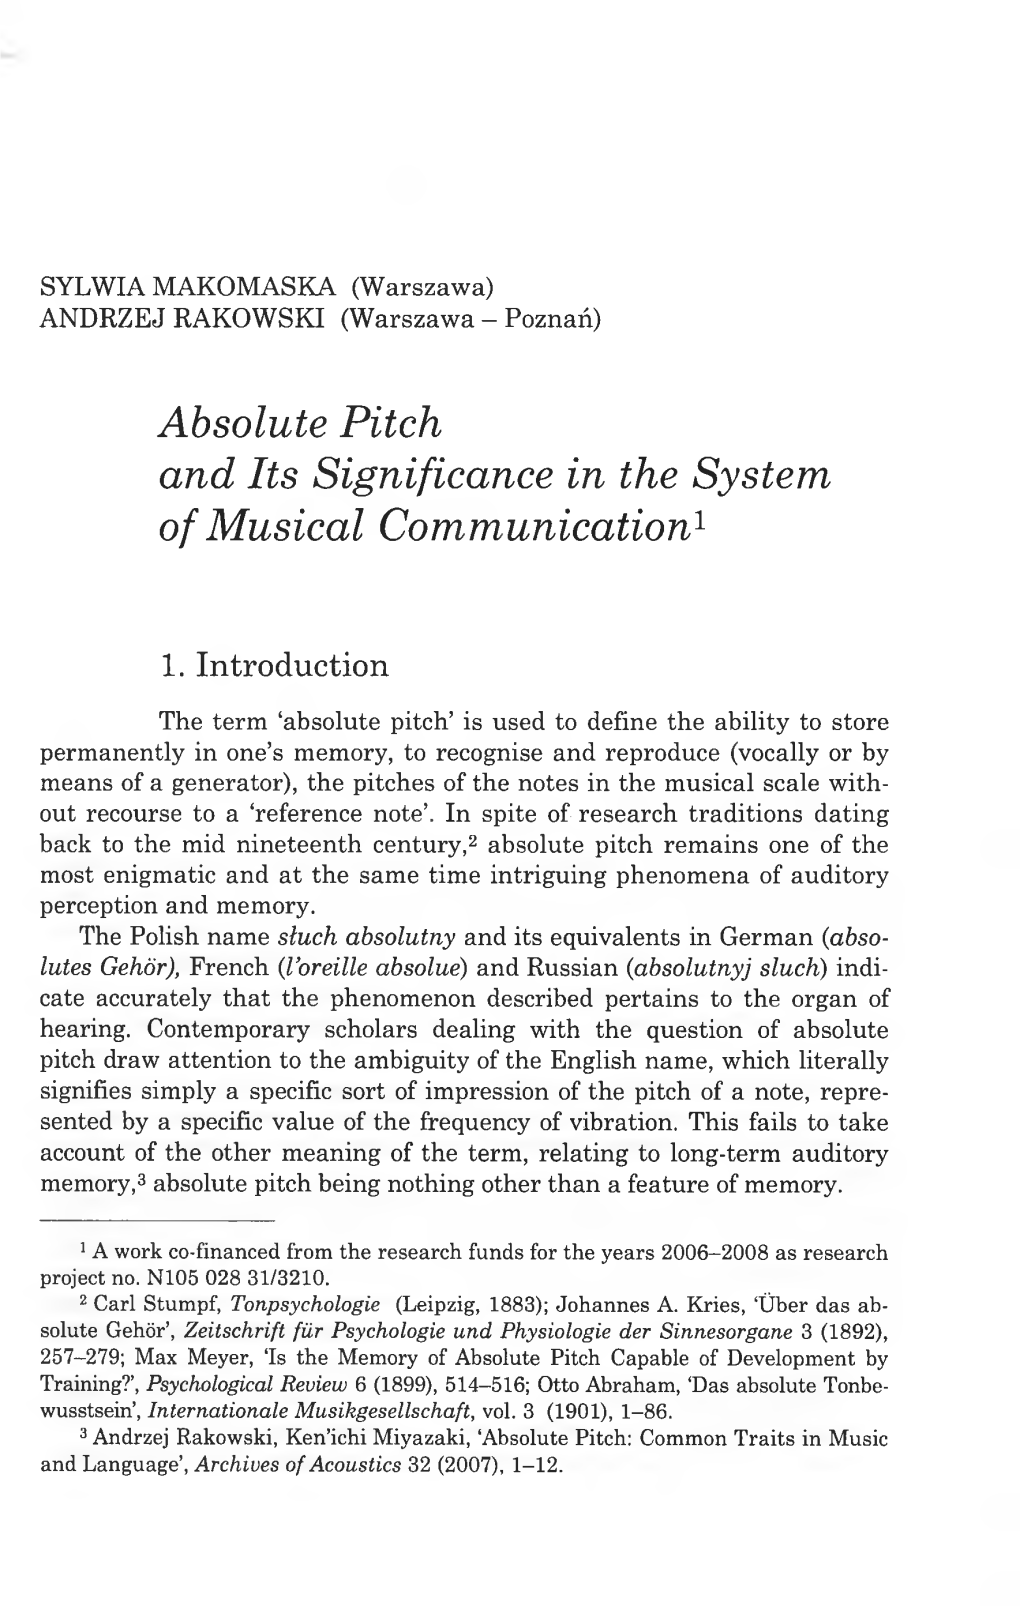 Absolute Pitch and Its Significance in the System of Musical Communication1